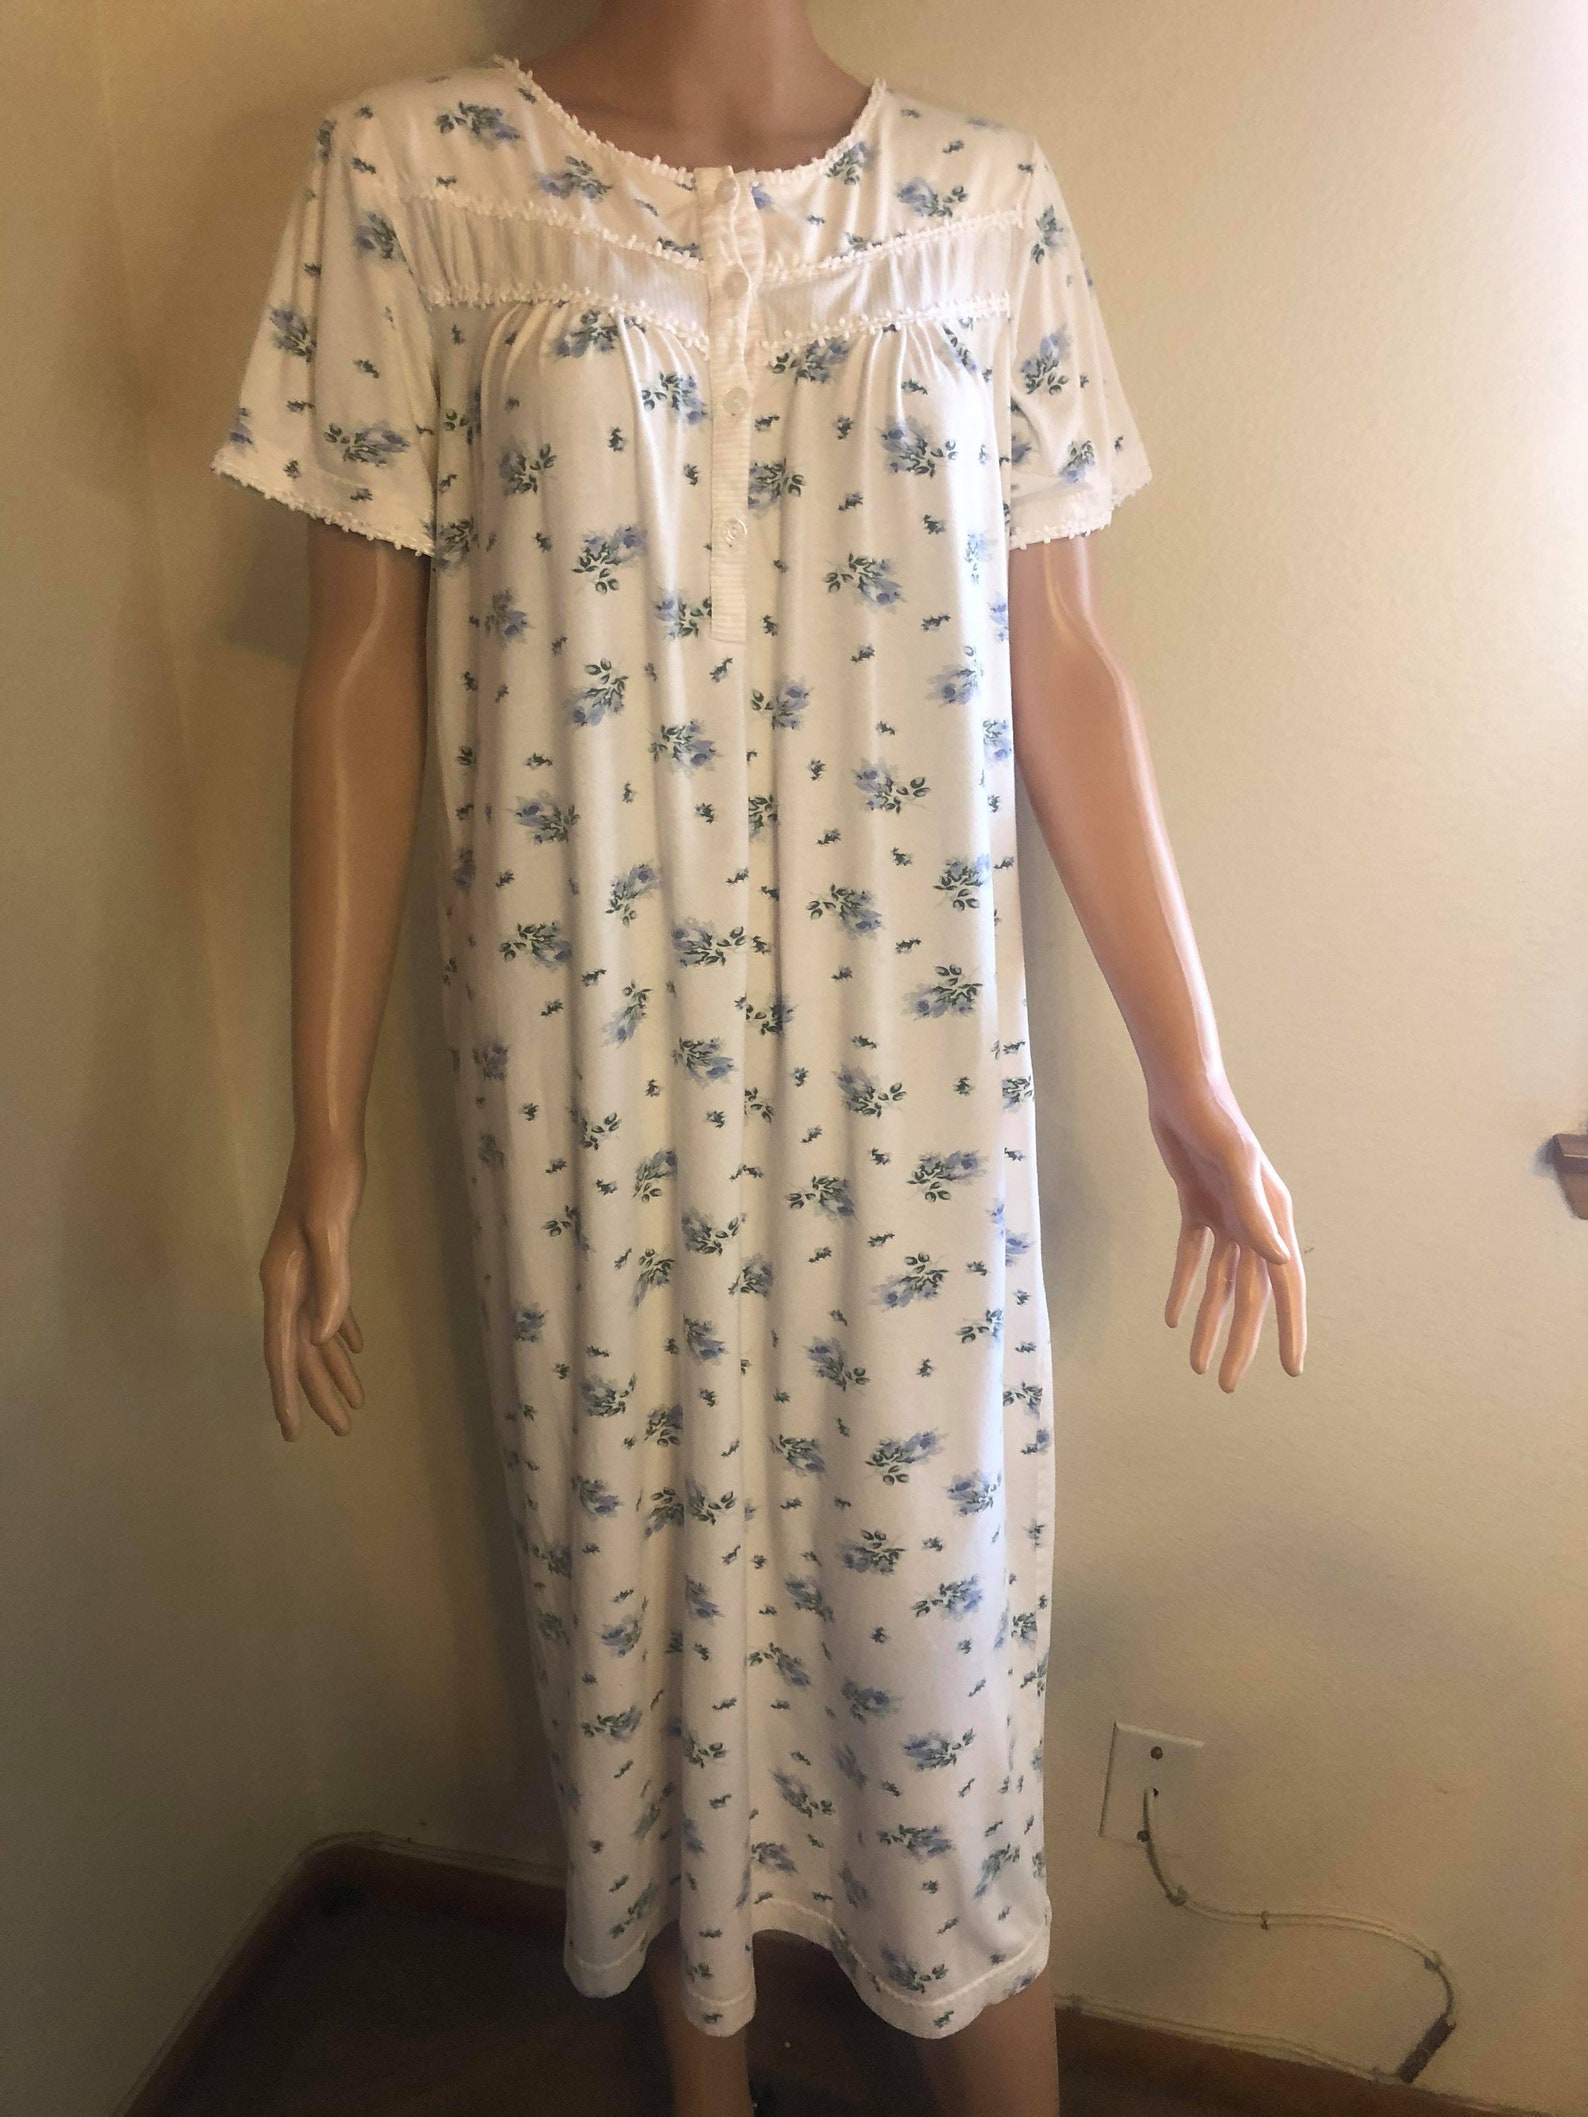 Vintage Laura Ashley floral nightgown .Size Medium. Made in | Etsy